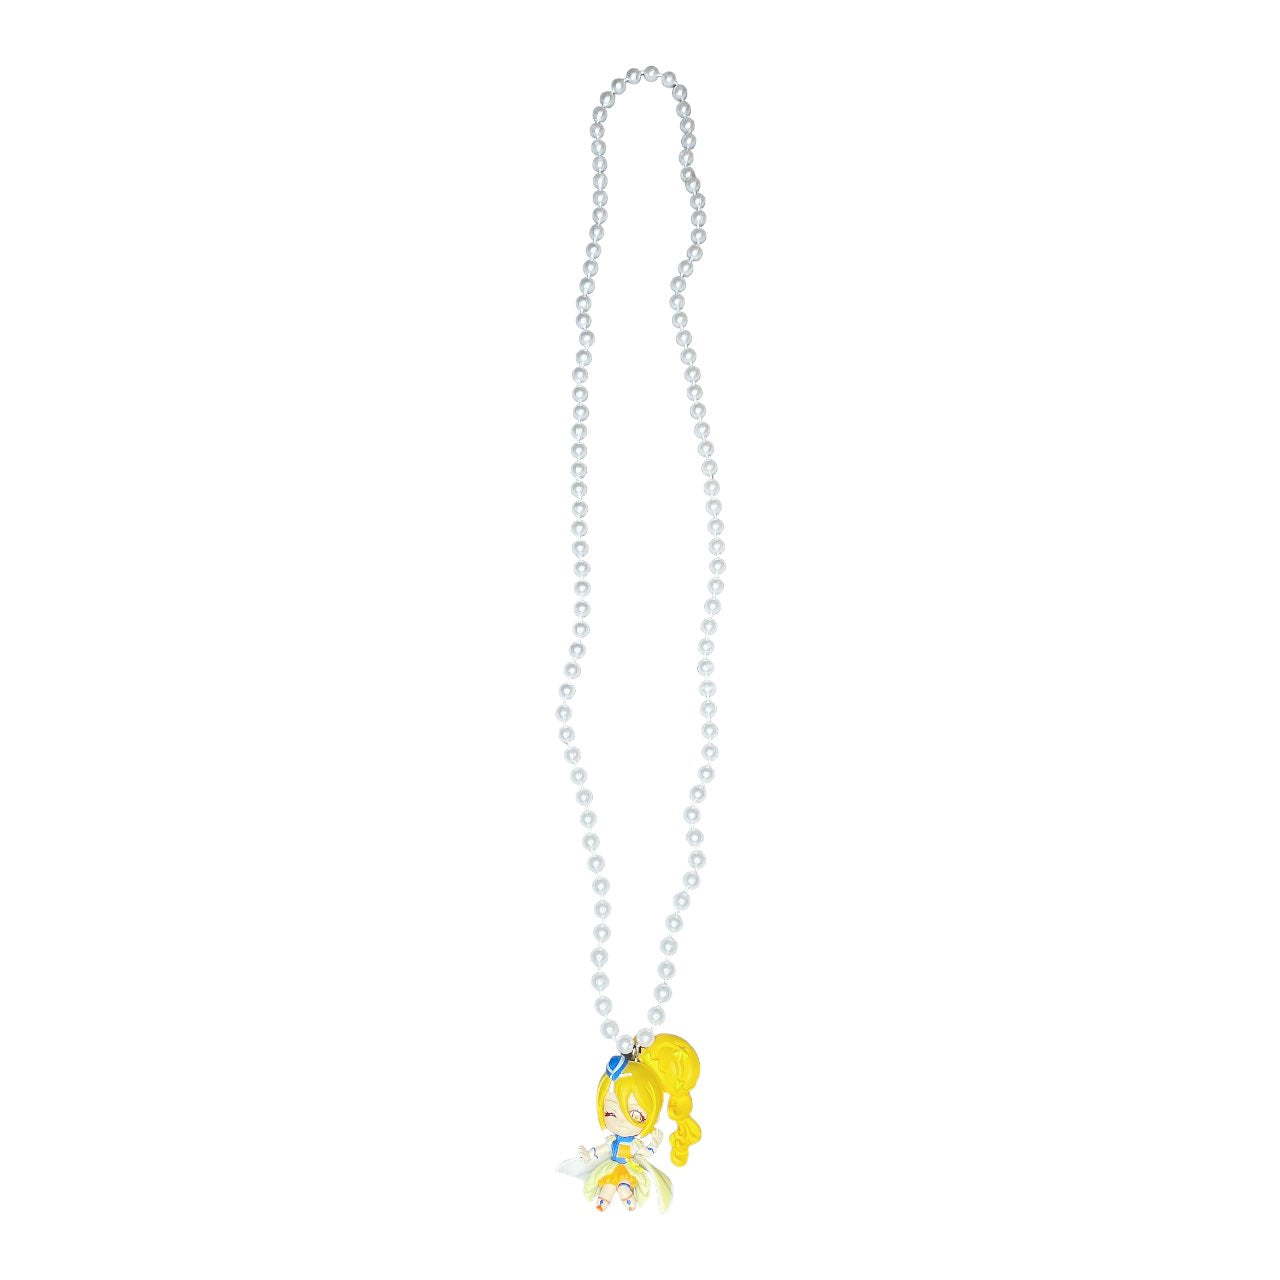 2000s 2010s Precure Anime Magical Girl Necklace